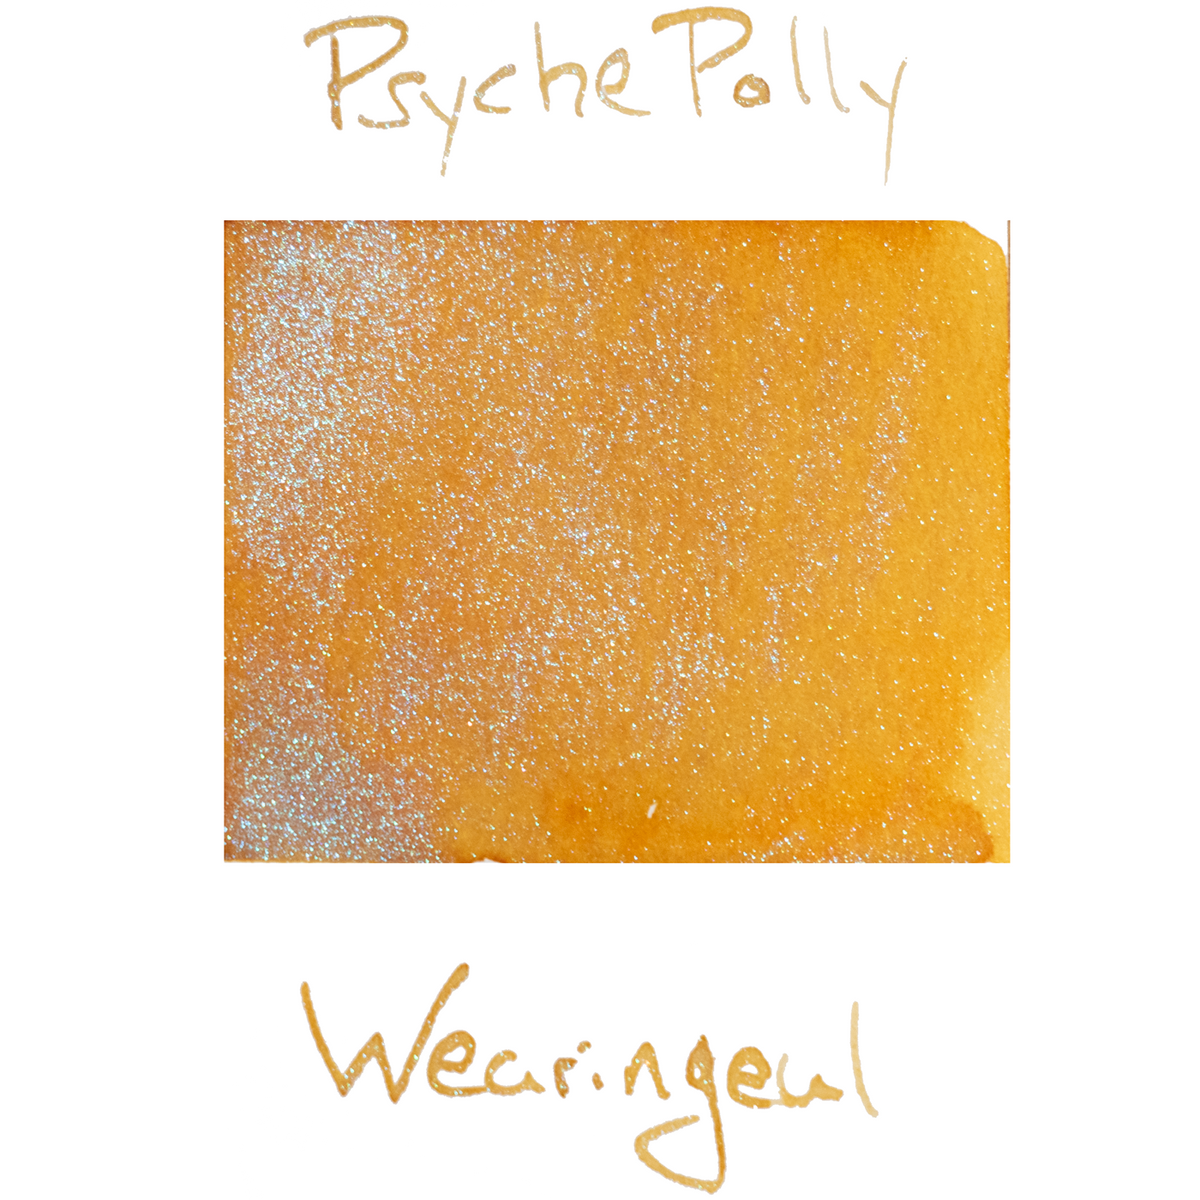 Wearingeul - Your Throne - Psyche Polly